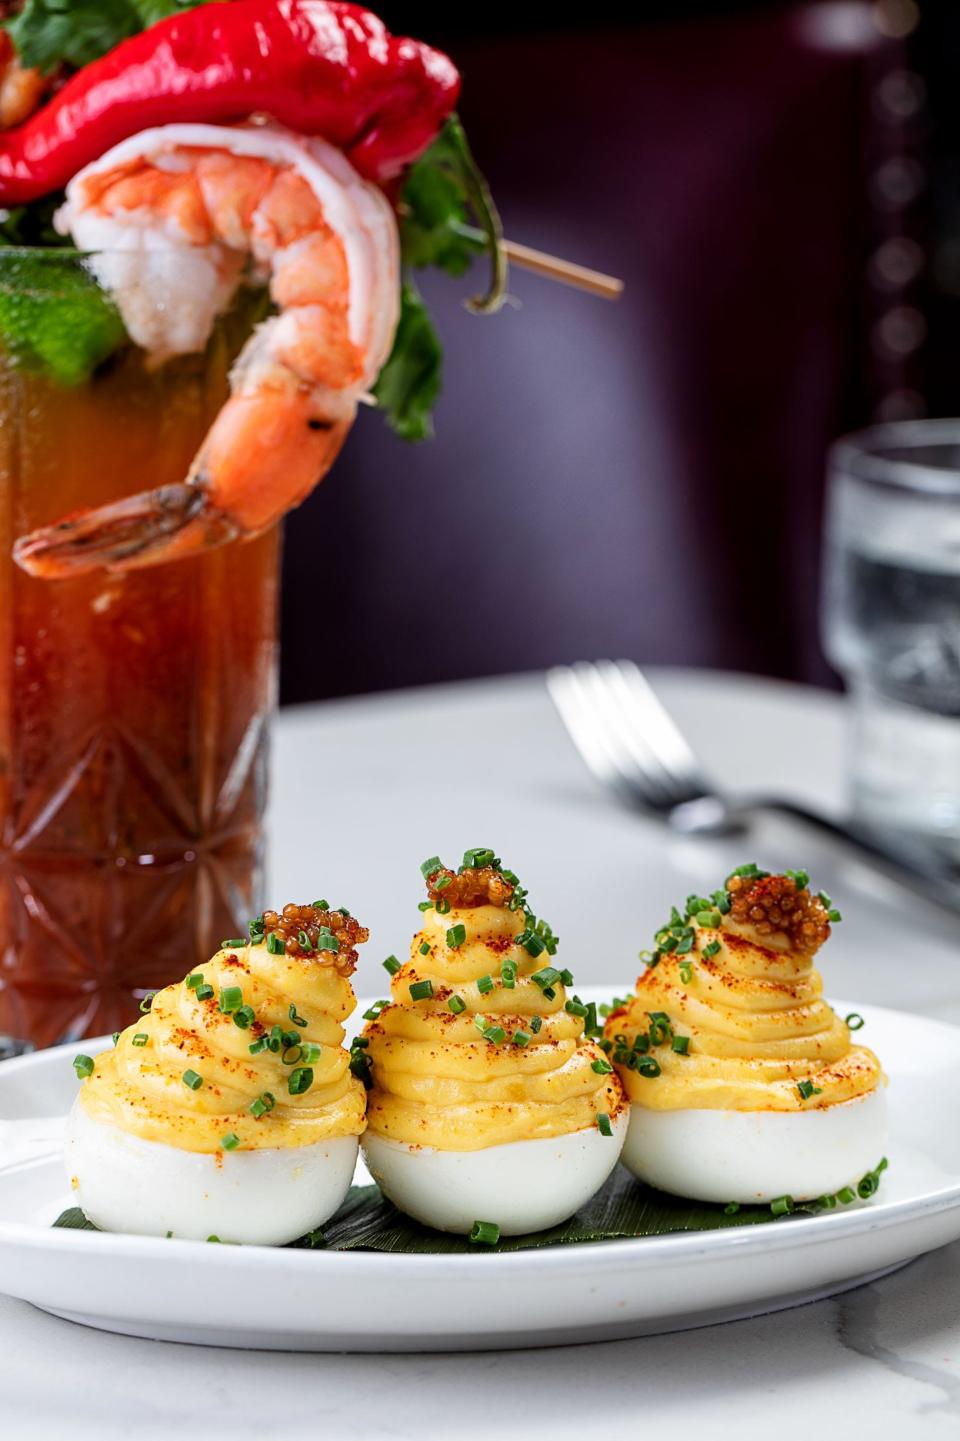 At The Wine Room Kitchen & Bar in Delray Beach, moms can enjoy bottomless mimosas and bloody marys along with brunch items like deviled eggs.